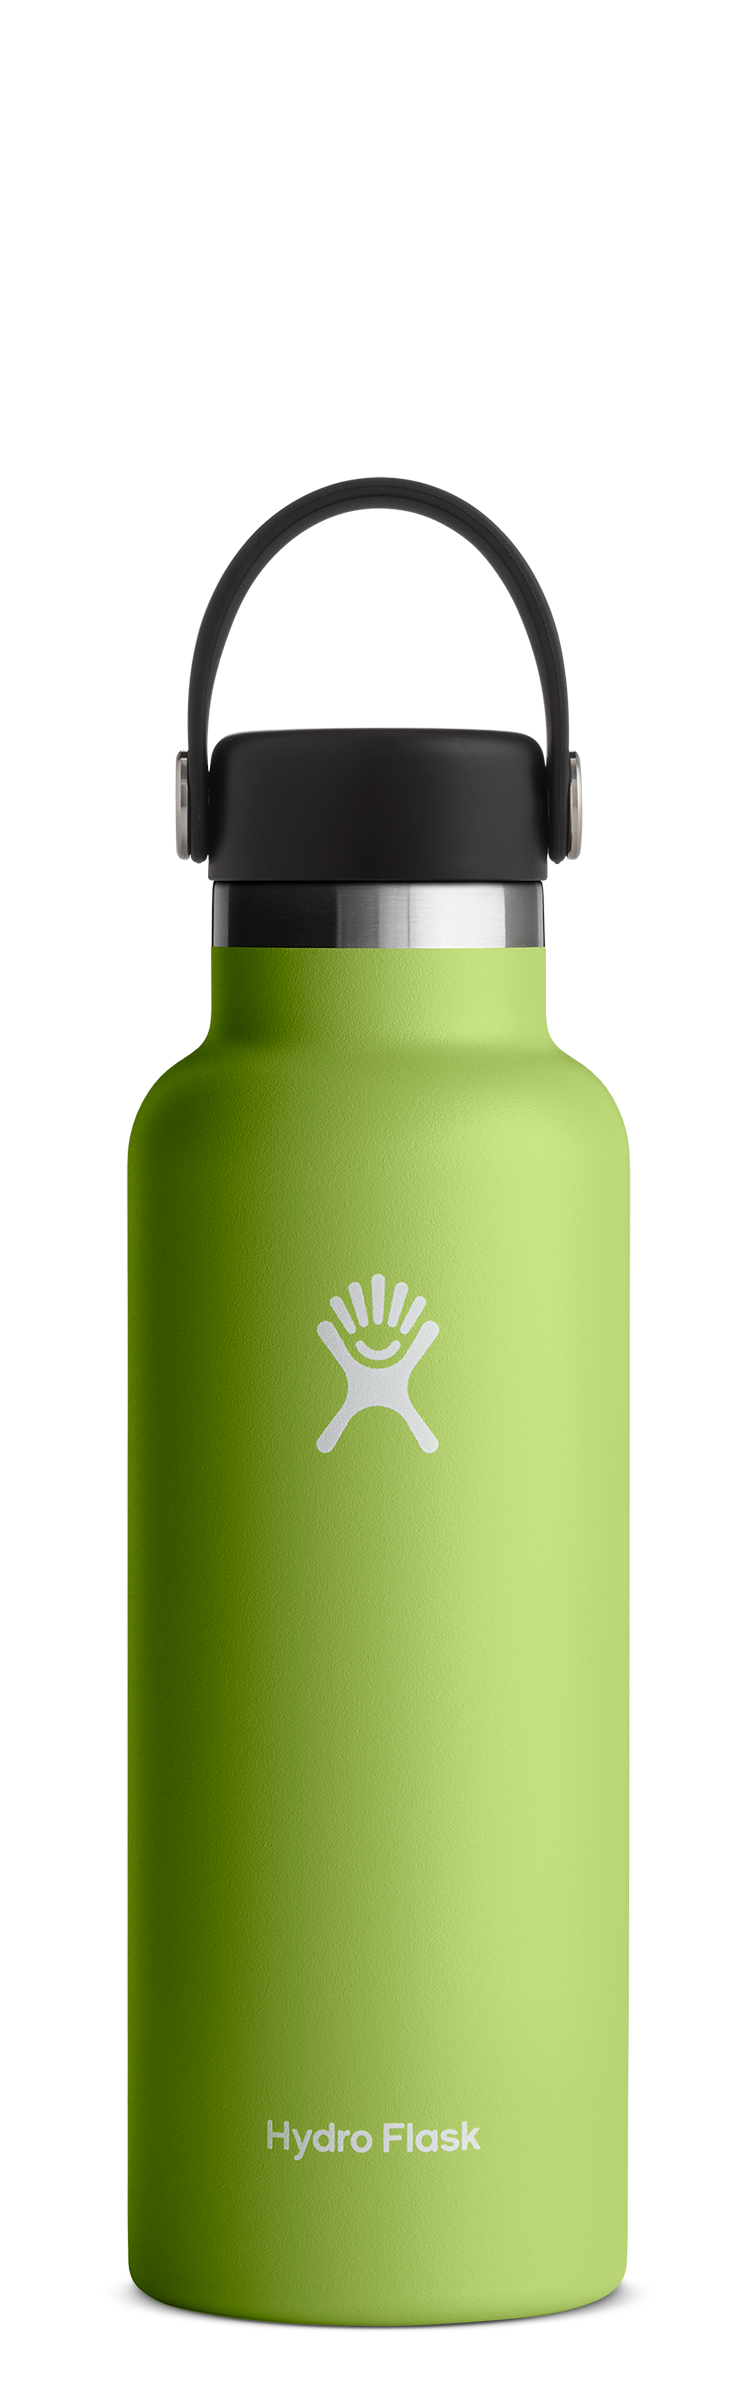 Hydro Flask 18 oz Standard Mouth Seagrass